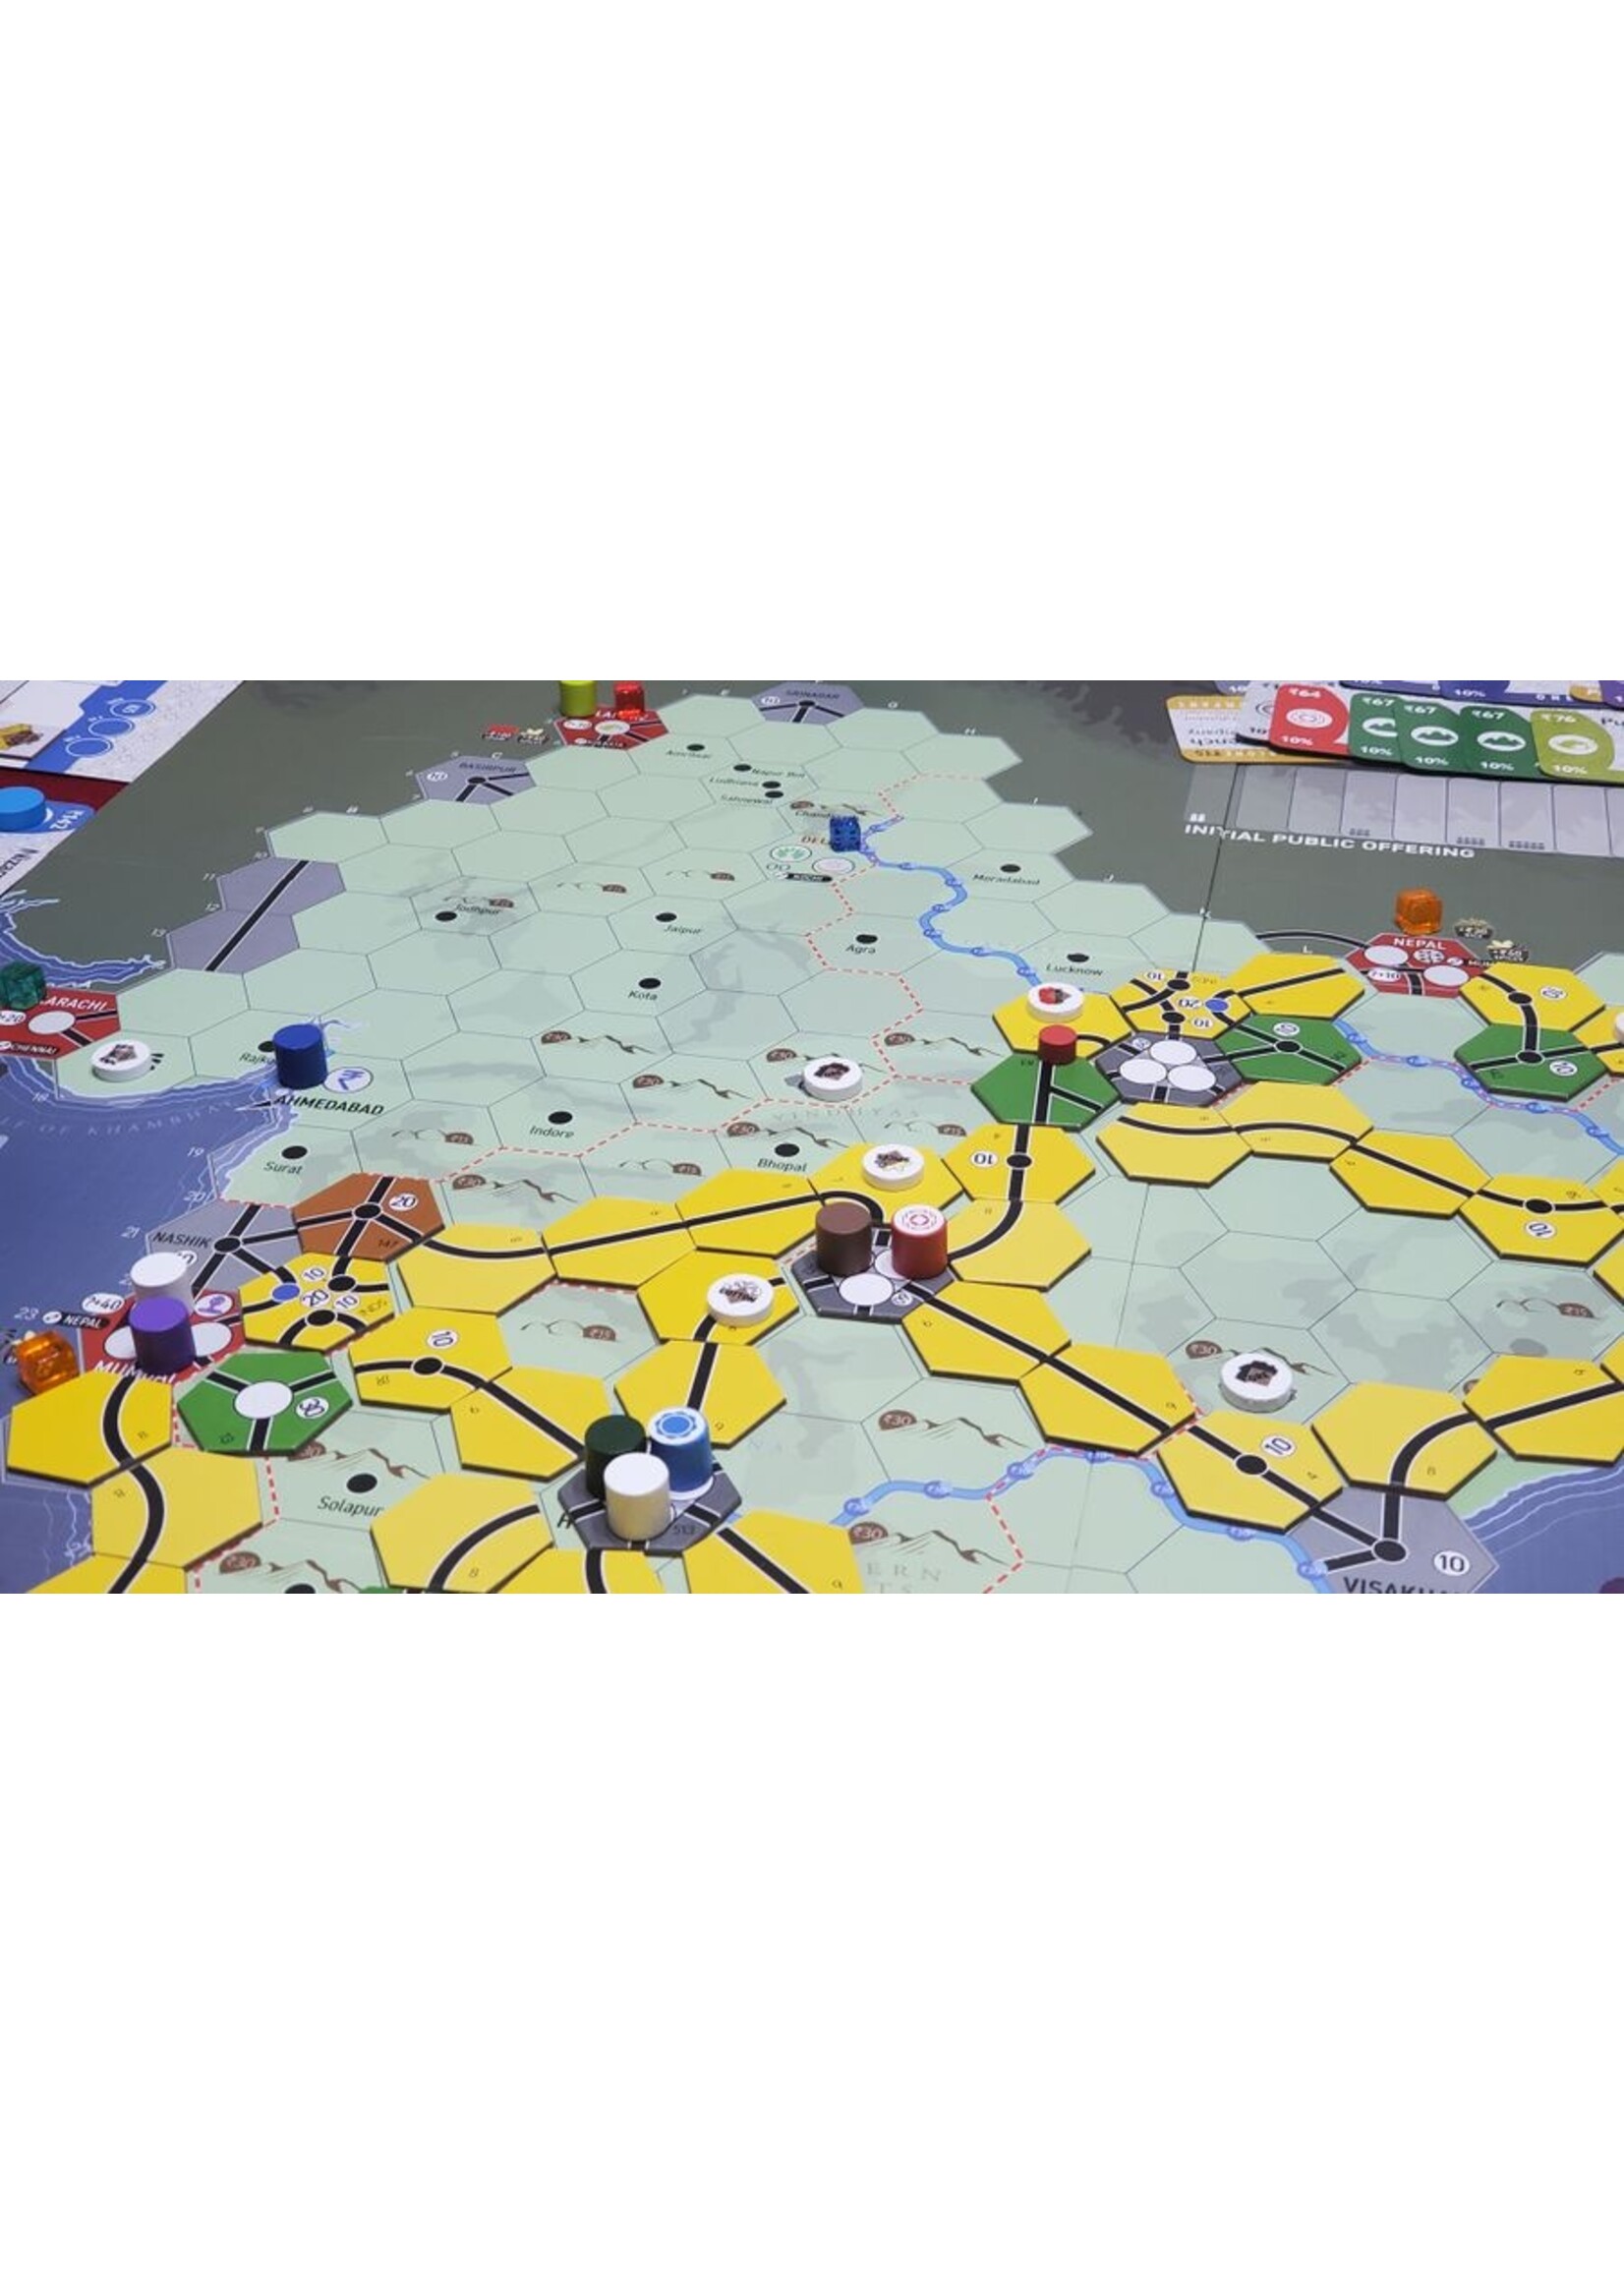 GMT Games 18 India